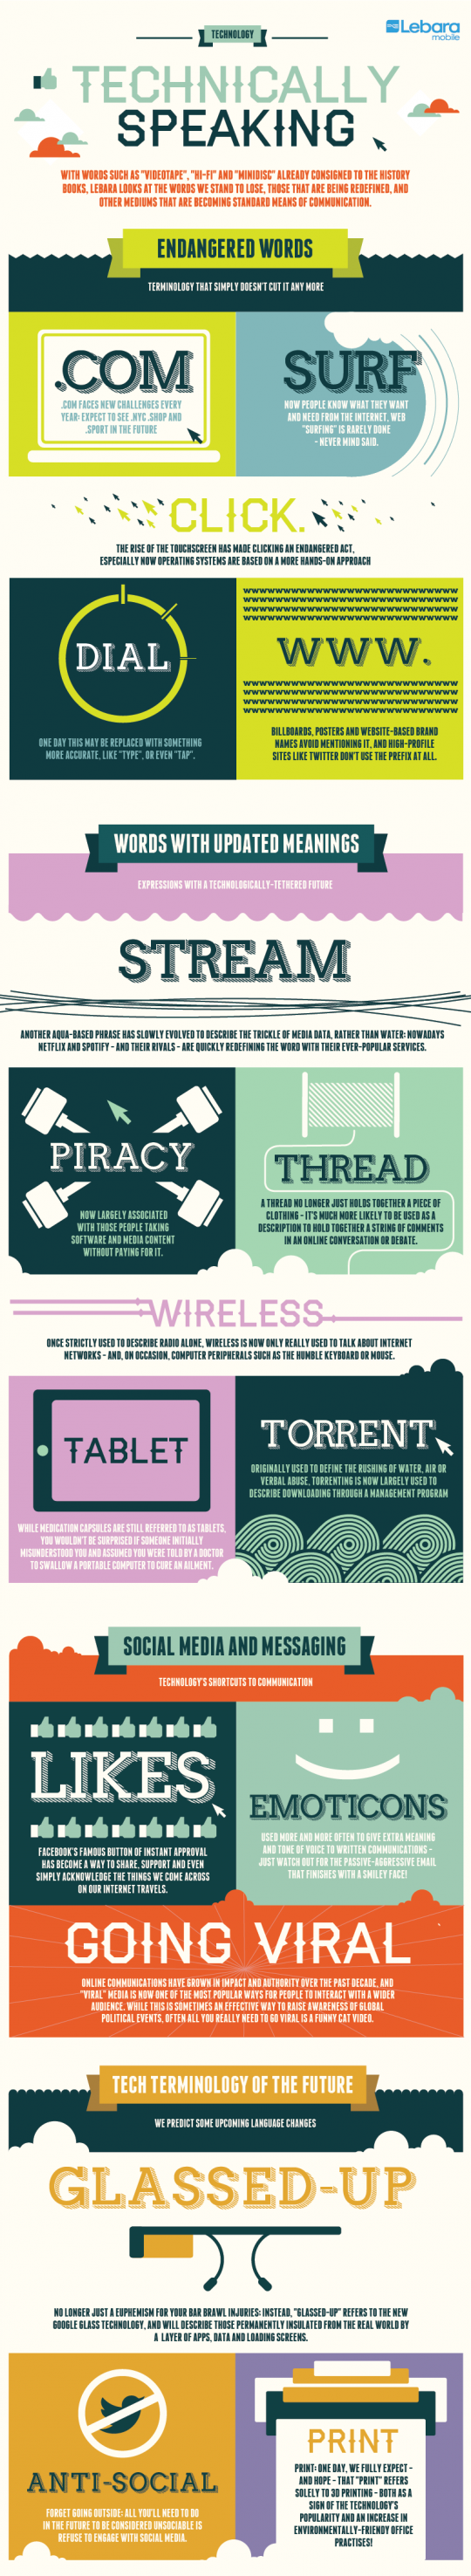 A Guide to New & Outdated Technology Terms | Lebara